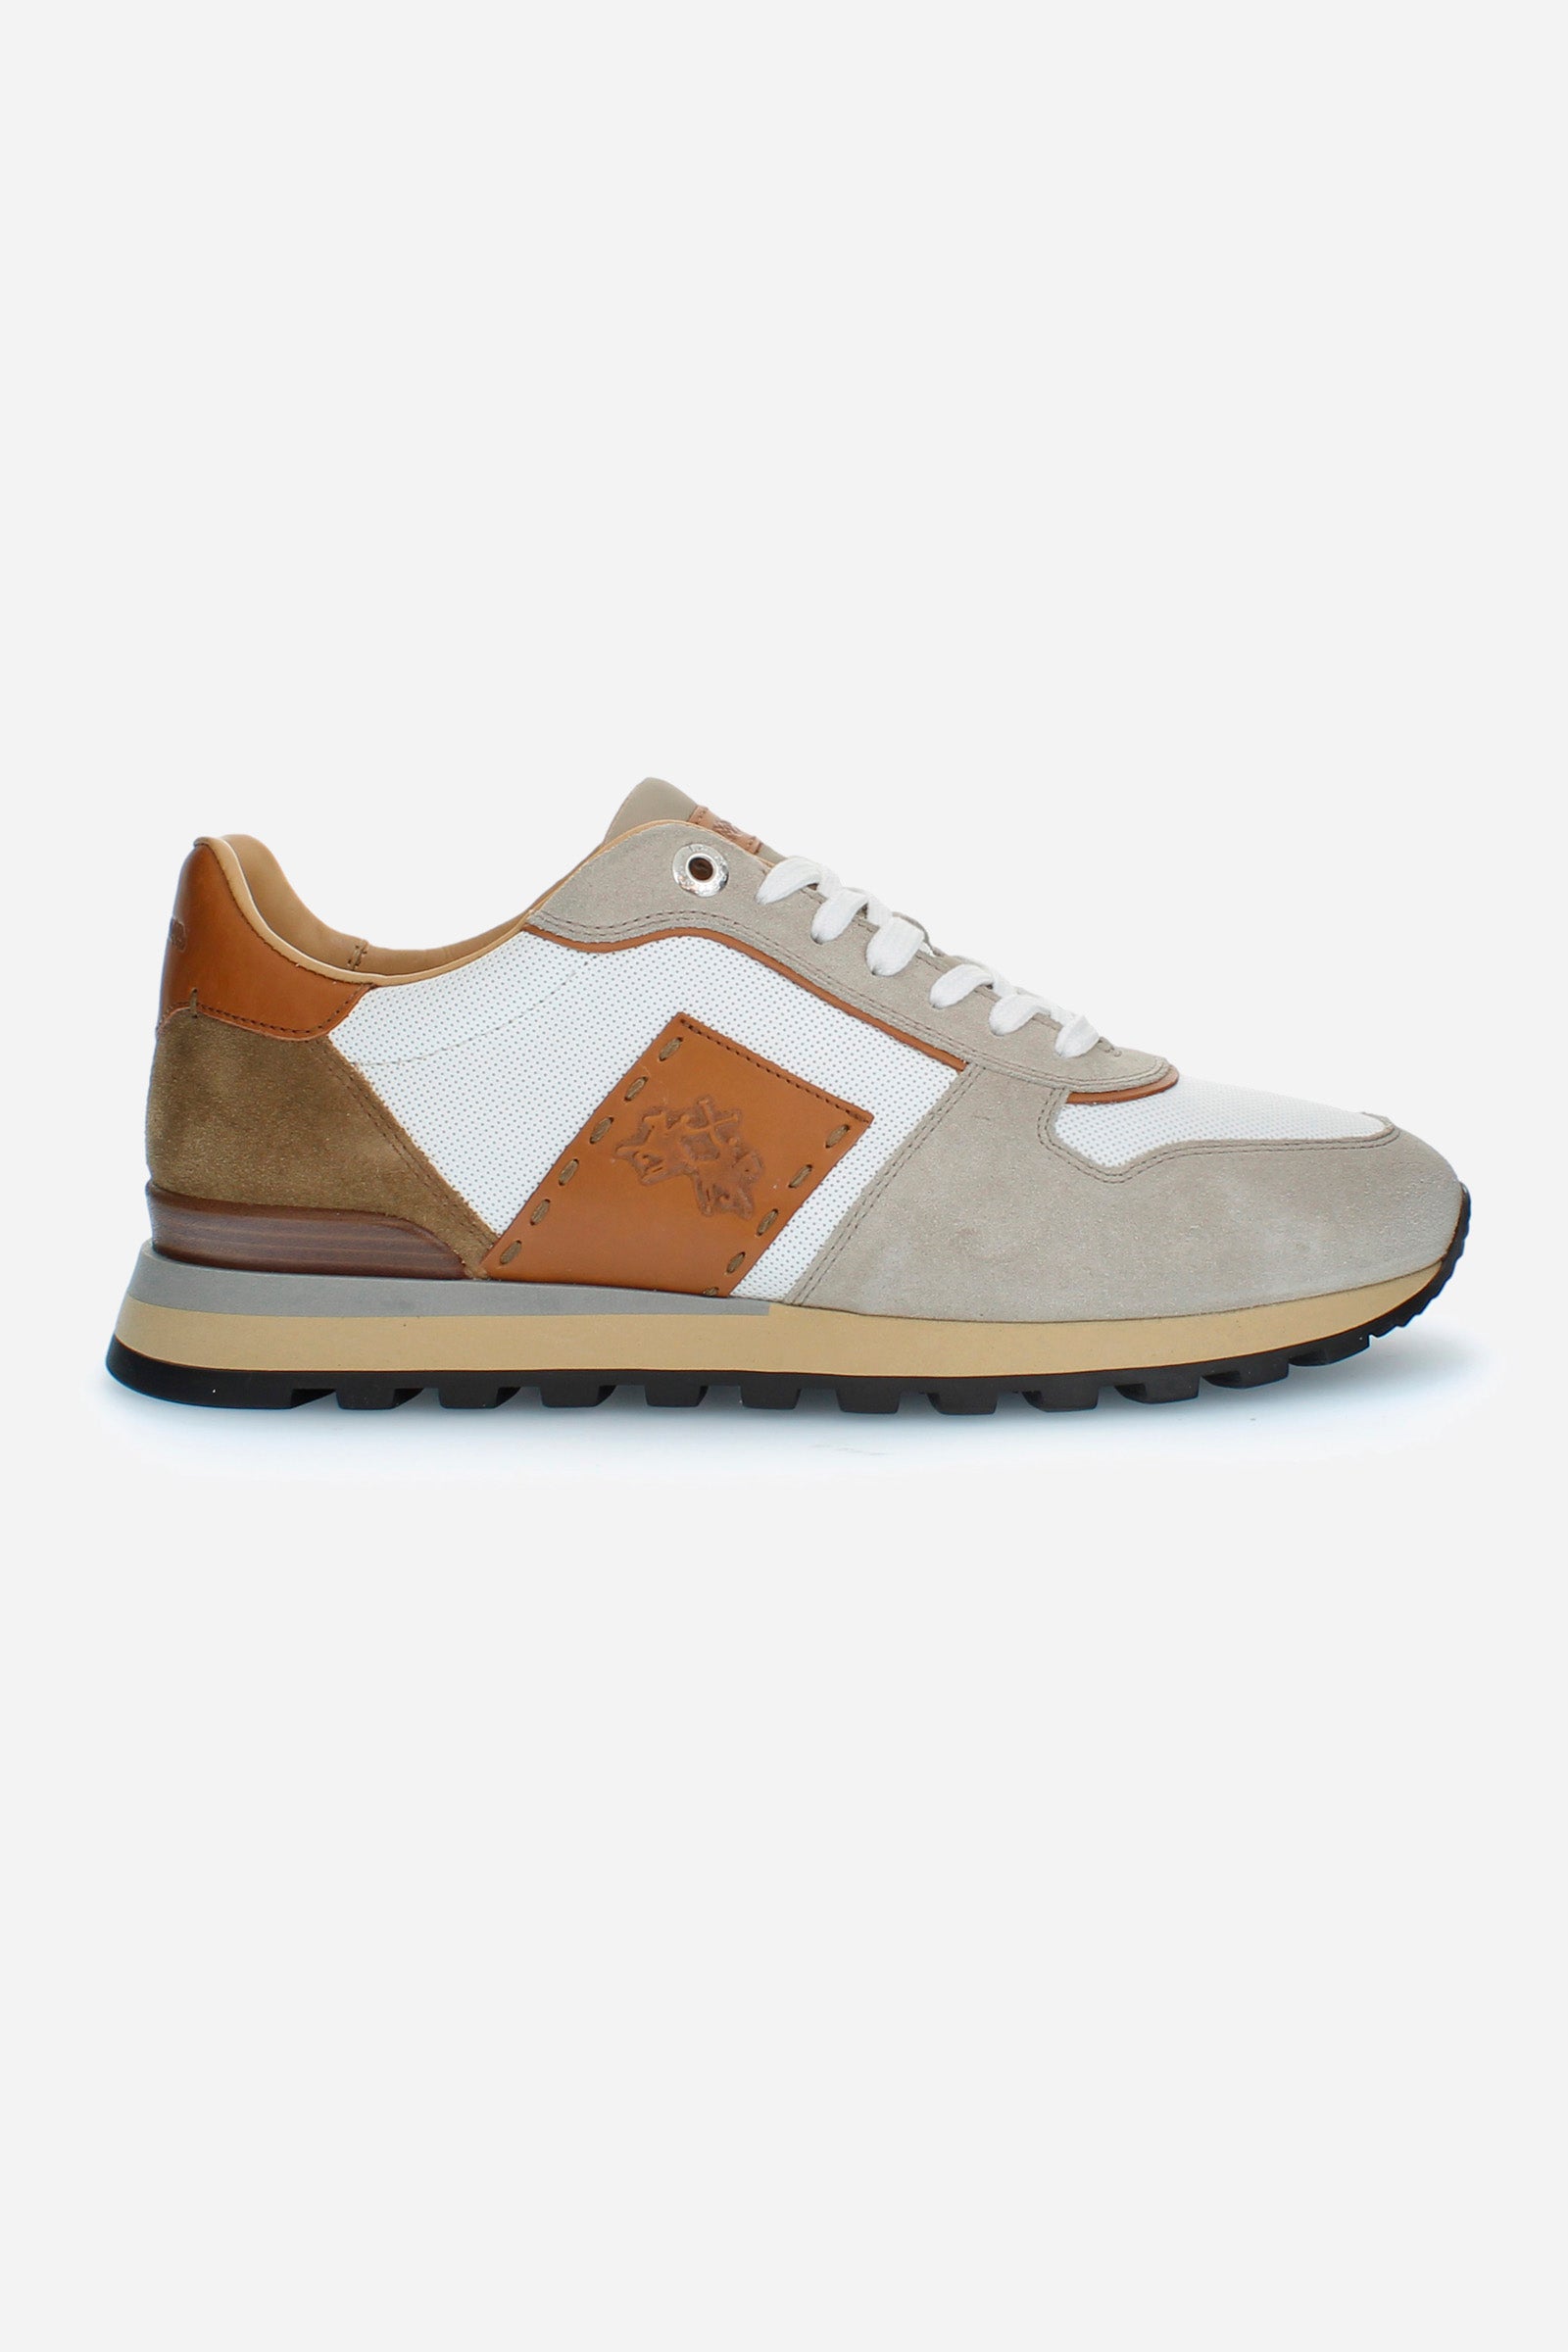 Men's trainers in multi-colour canvas and suede